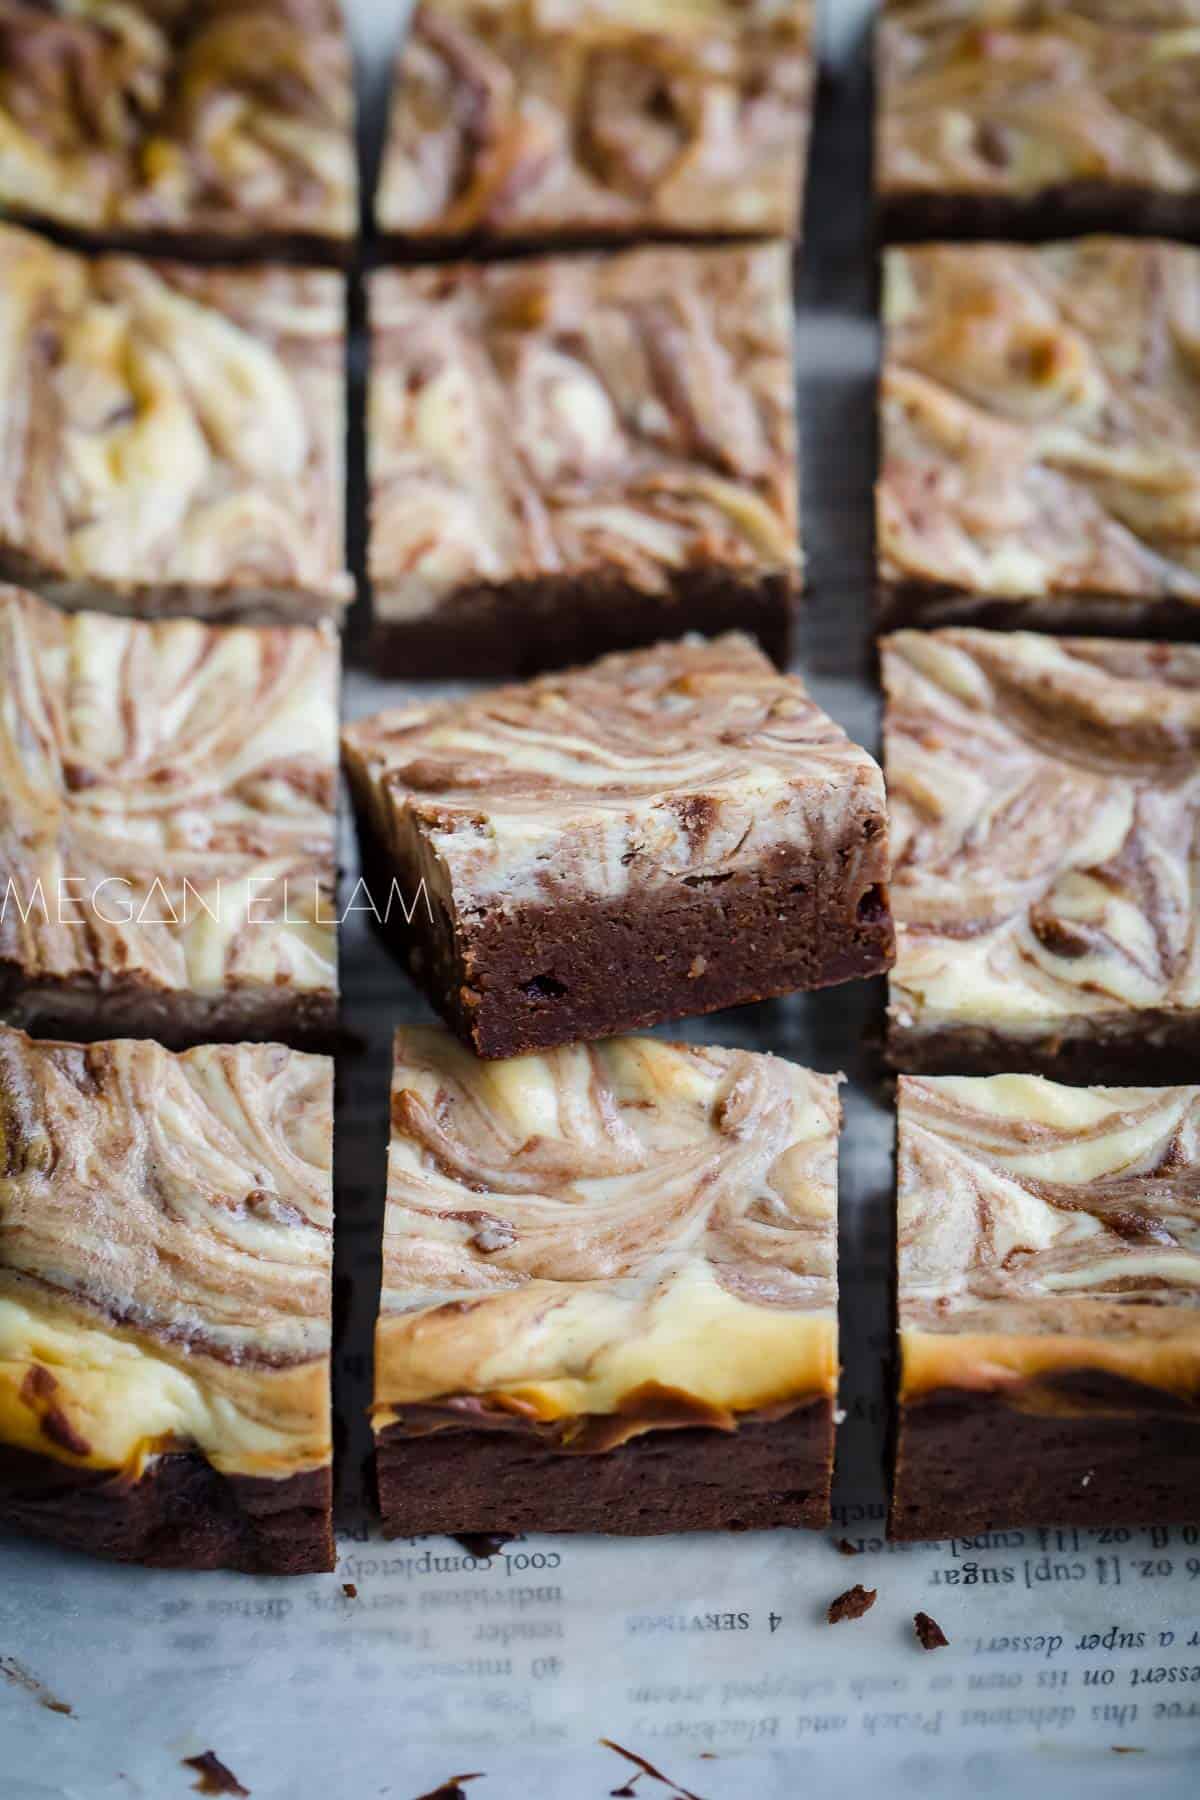 12 cheesecake brownies on baking paper but with one angled up to show you how moist and fudgy it is.